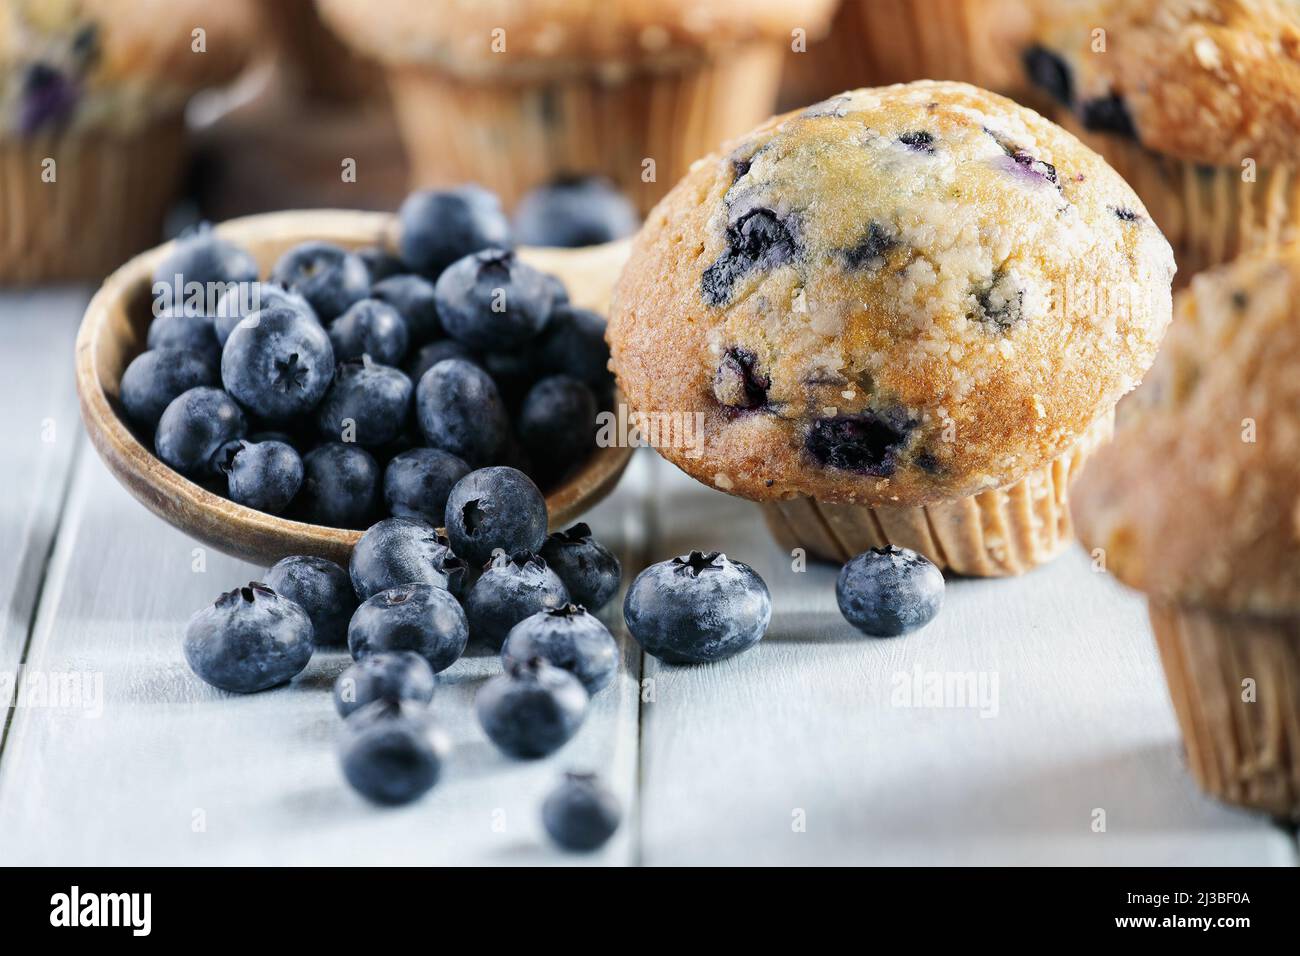 Fresh blueberry muffins with raw blueberries spilling from a wooden spoon. Selective focus on center with blurred foreground and background. Stock Photo